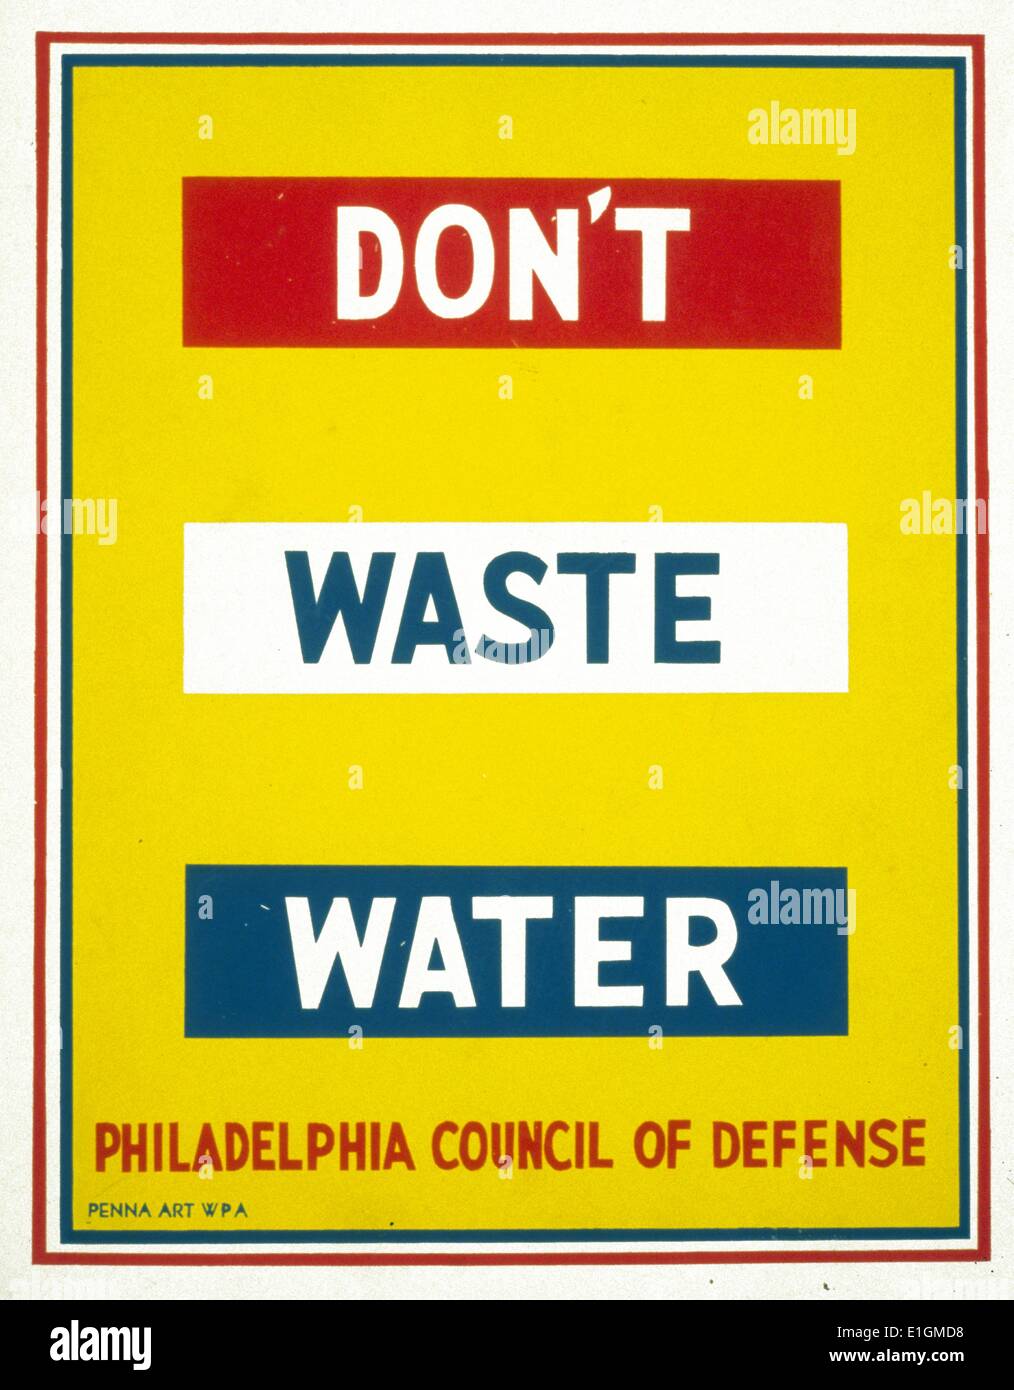 Don't waste water Poster by Raymond Wilcox. Poster for Philadelphia Council of Defence encouraging conservation of water as part of the war effort. Dated 1942 Stock Photo